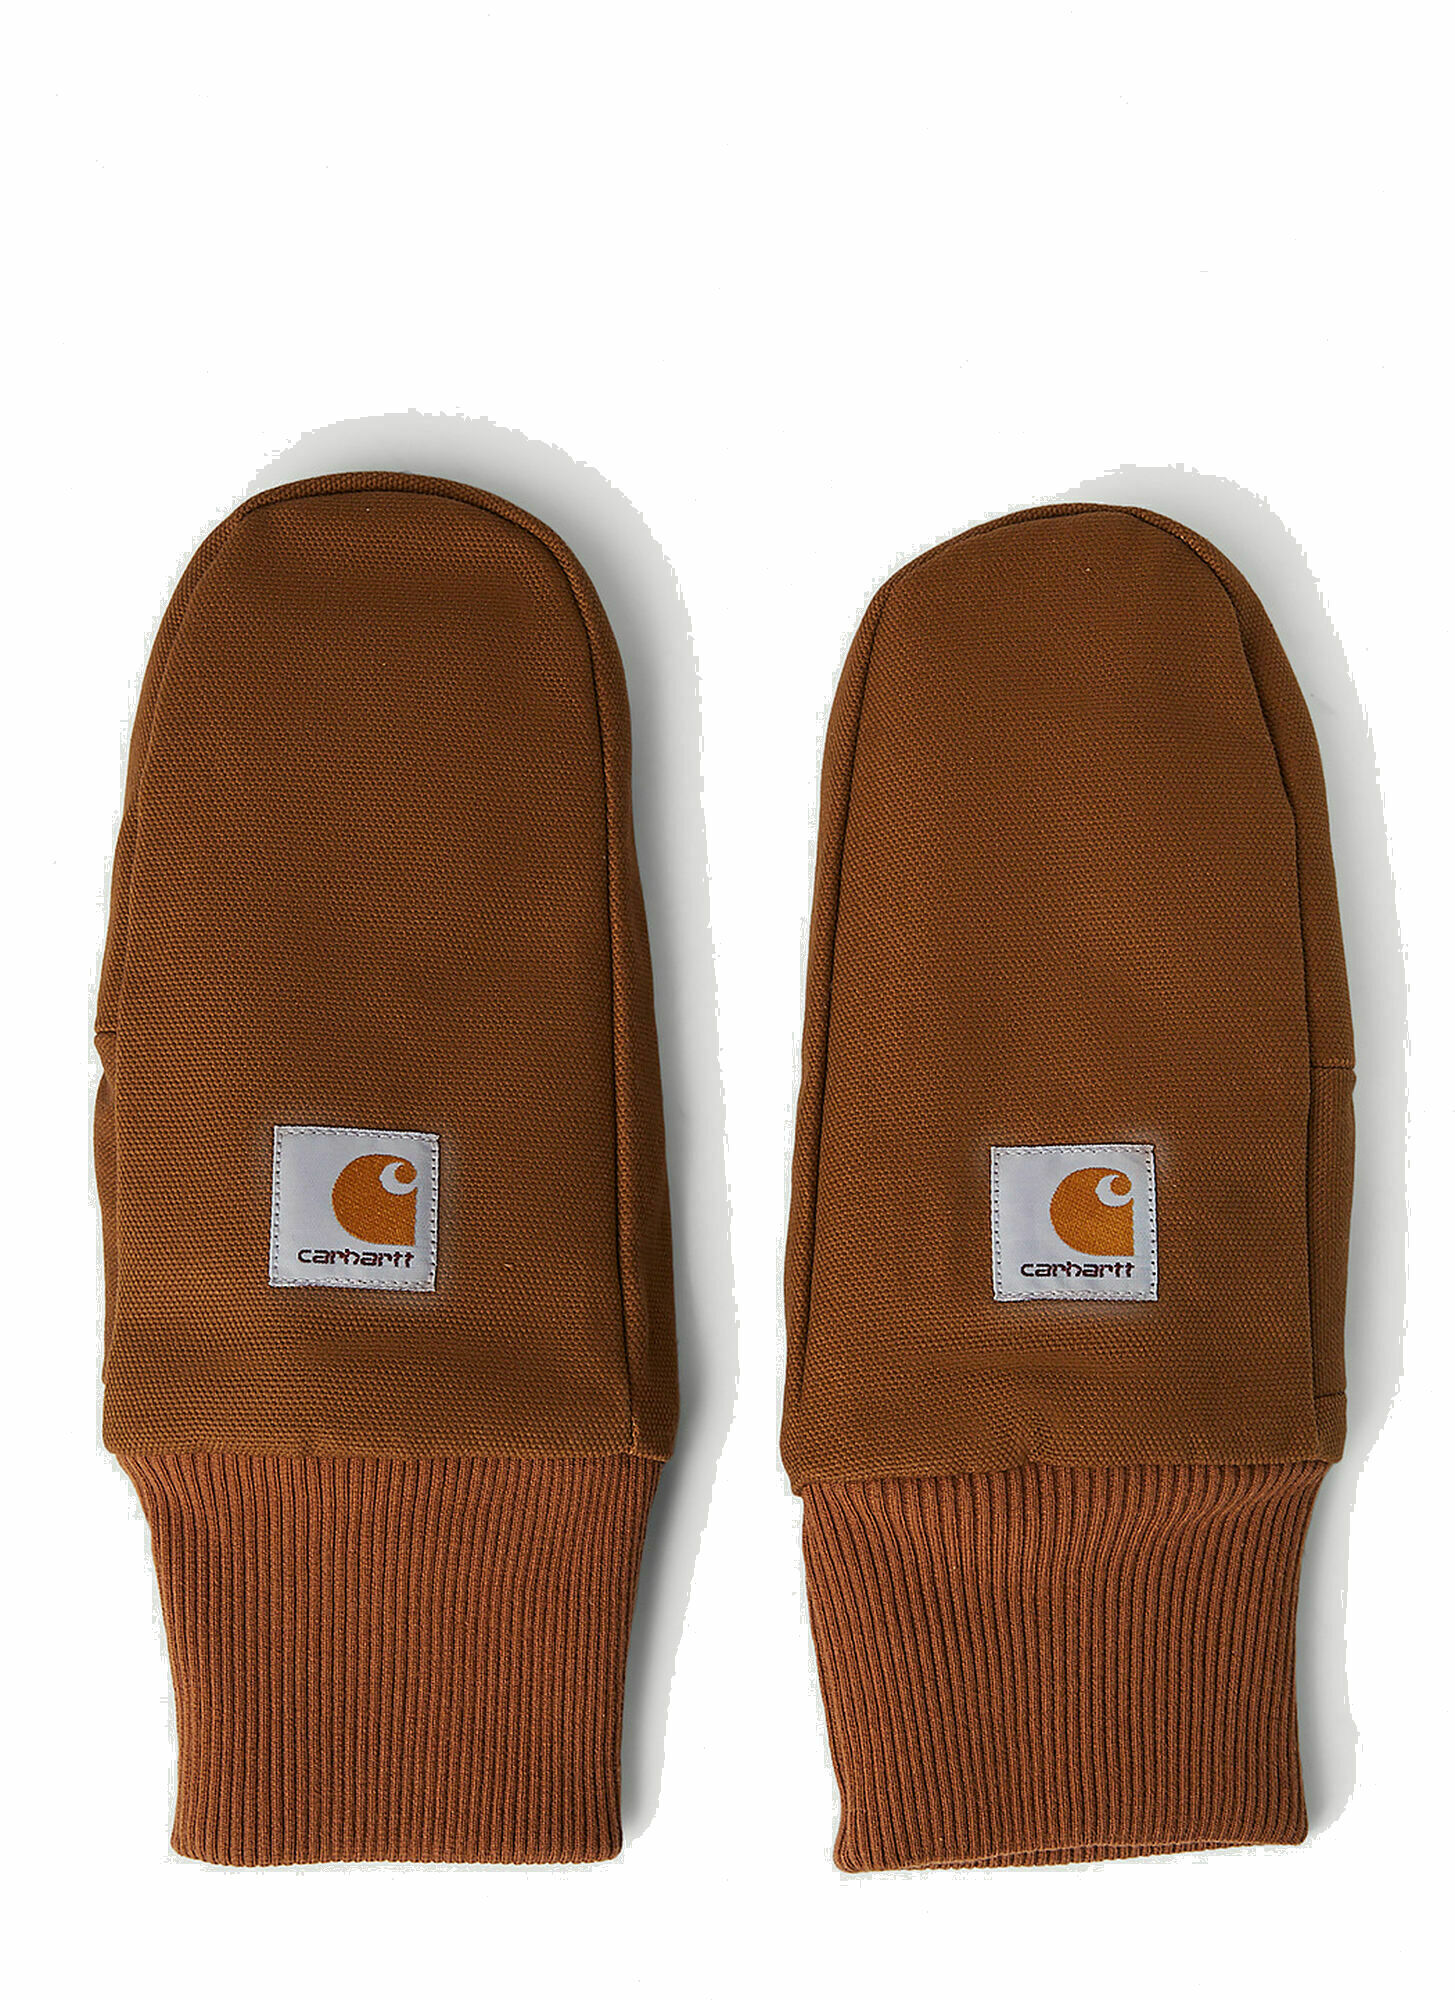 Photo: Carston Mittens in Brown